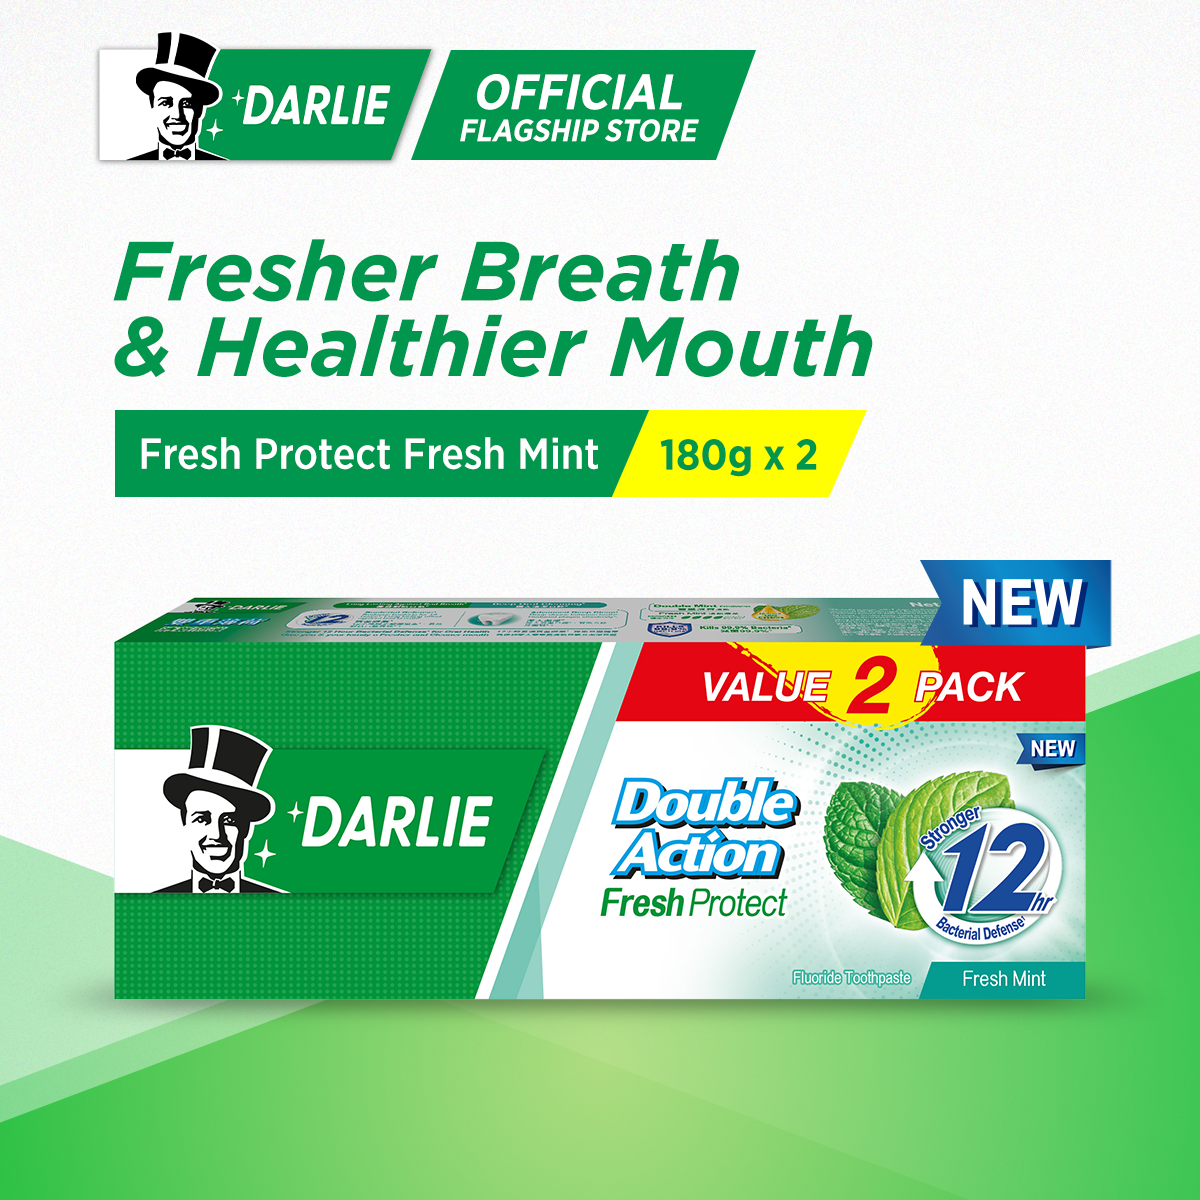 Darlie Double Action Fresh Protect Toothpaste Fresh Mint 180g x 2 (Value Pack)